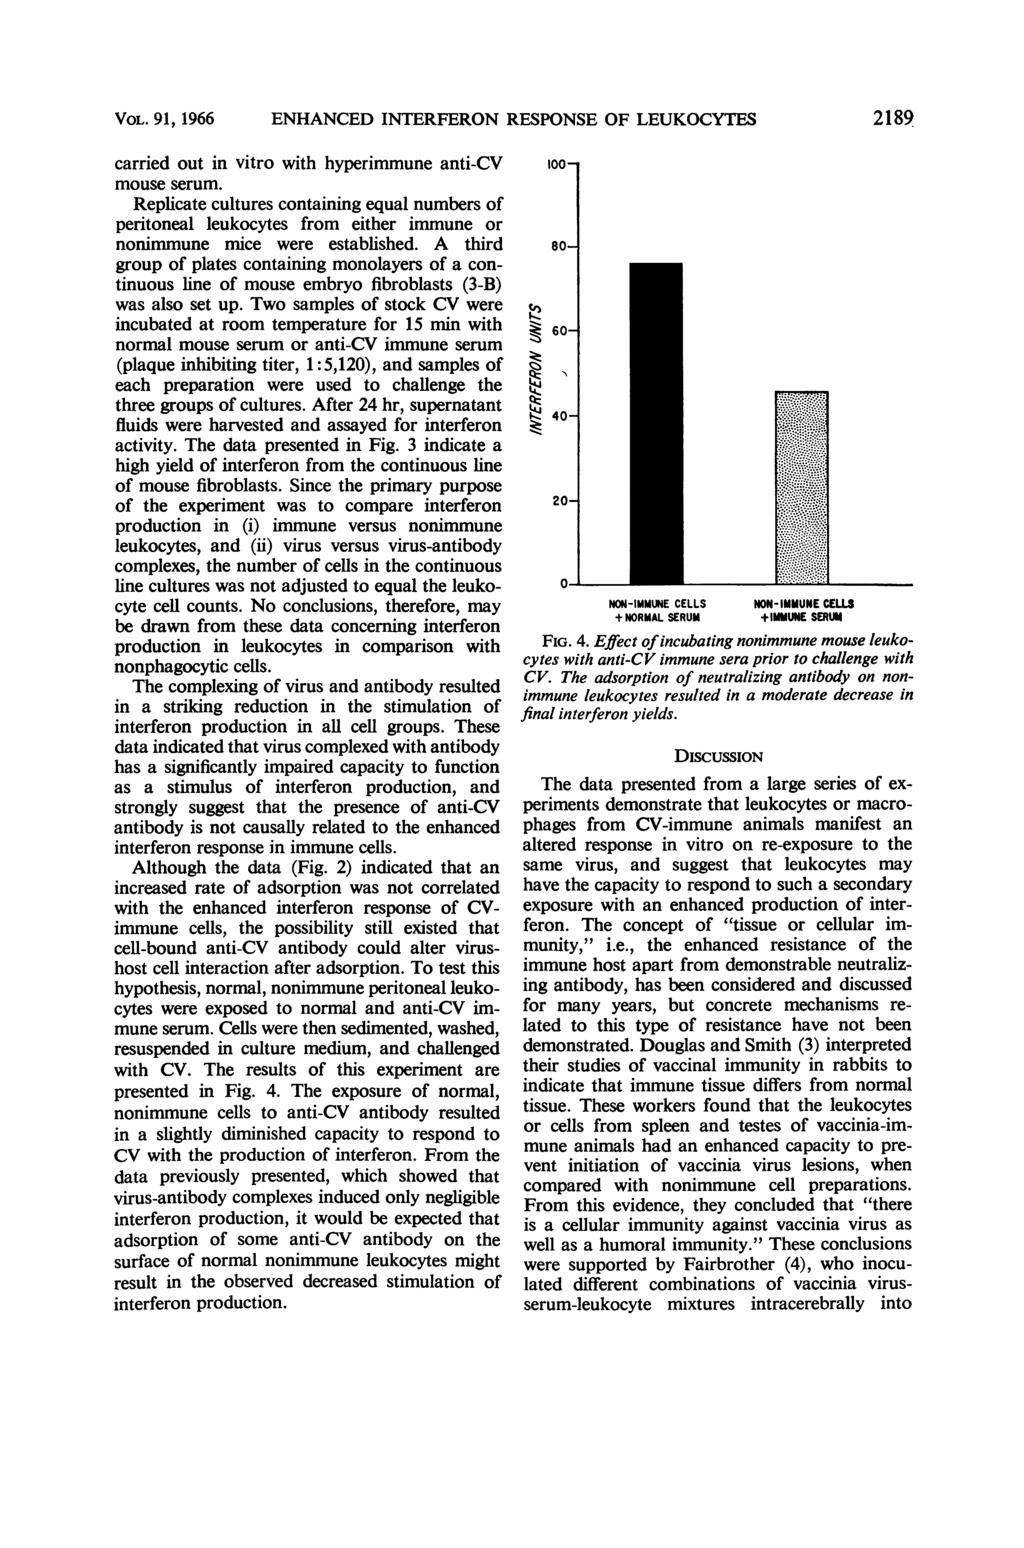 VOL. 91, 1966 ENHANCED INTERFERON RESPONSE OF 2189 carried out in vitro with hyperimmune anti-cv mouse serum.